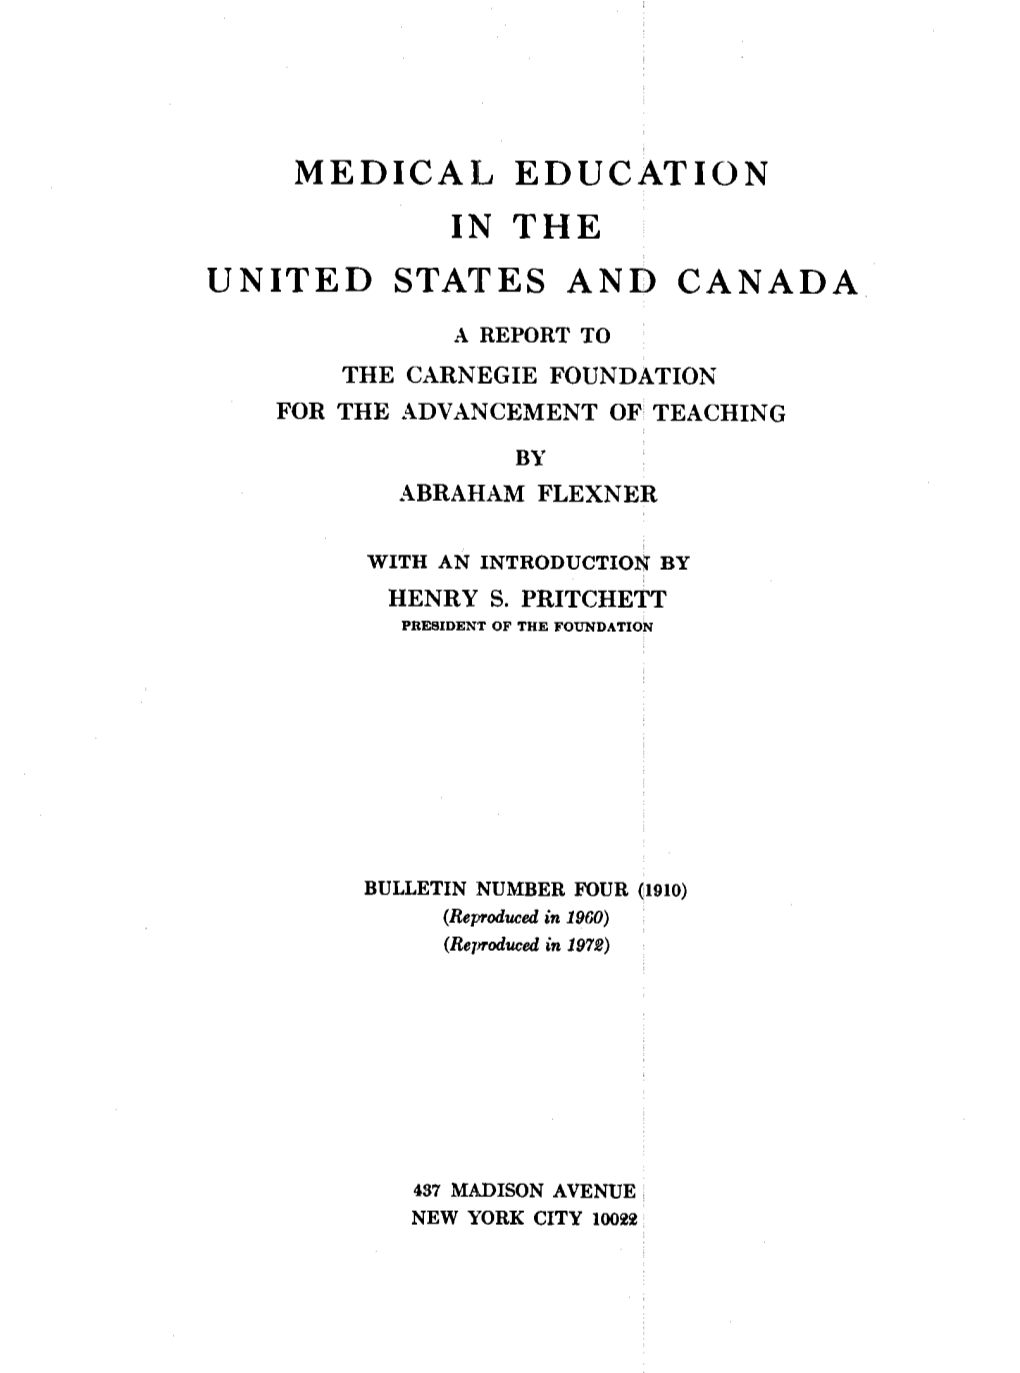 Flexner Report on Medical Education in the United States and Canada